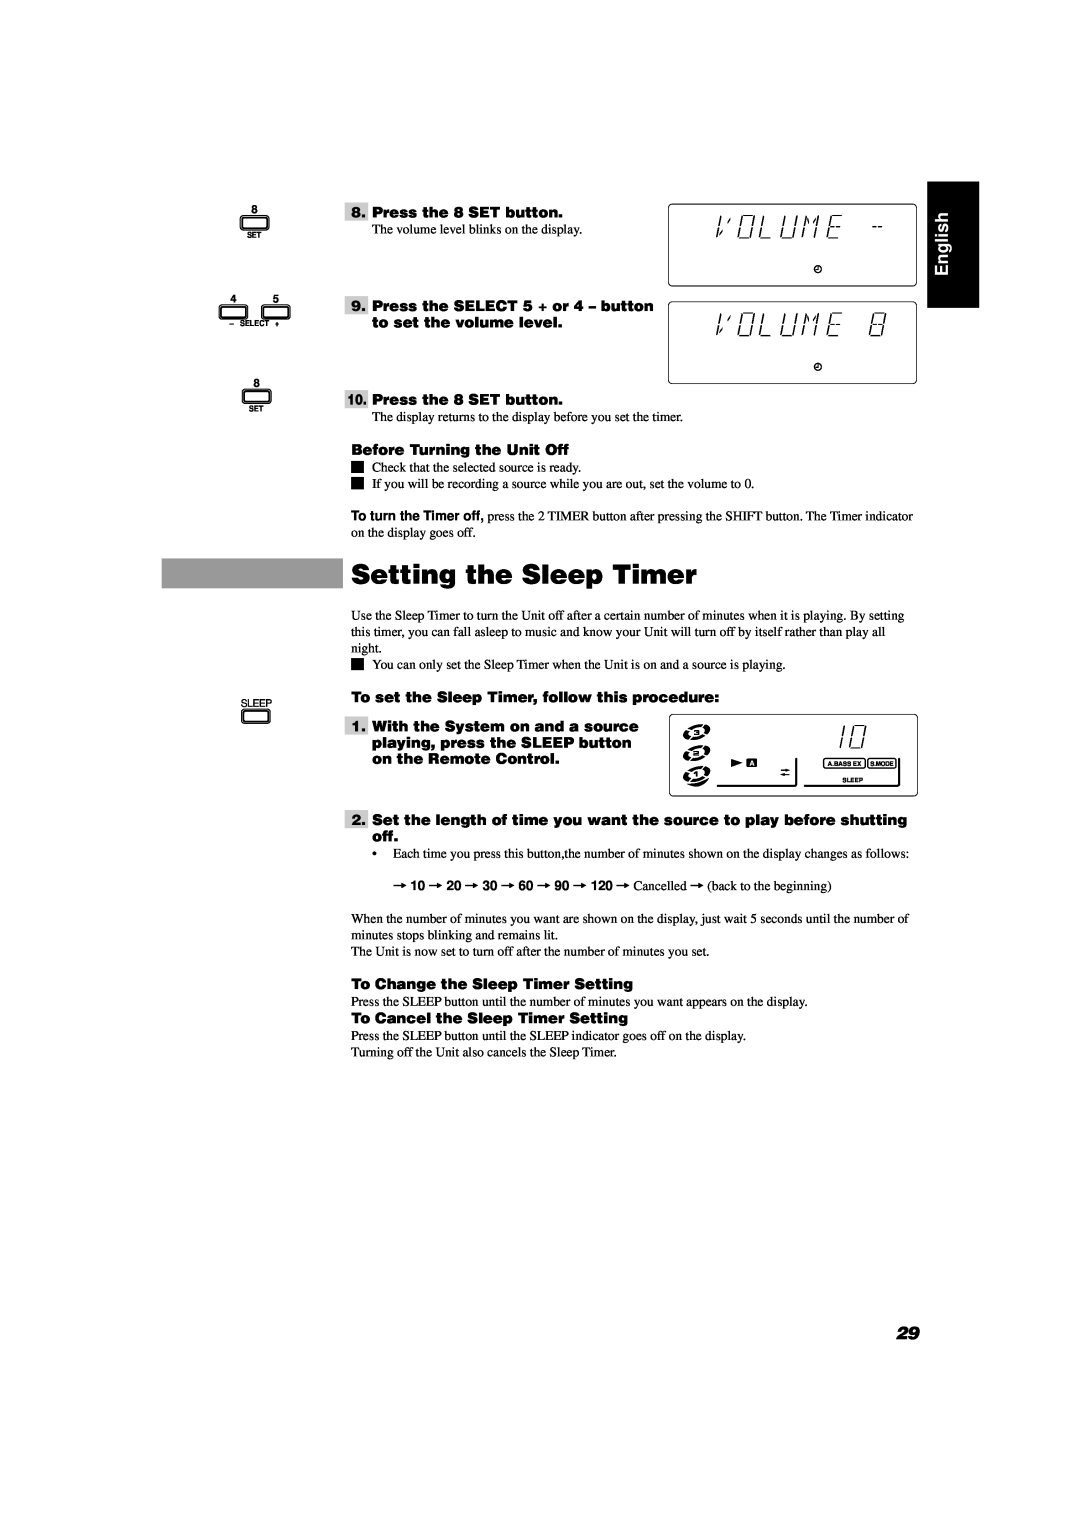 JVC CA-D302T Setting the Sleep Timer, English, Press the 8 SET button, Before Turning the Unit Off, on the Remote Control 